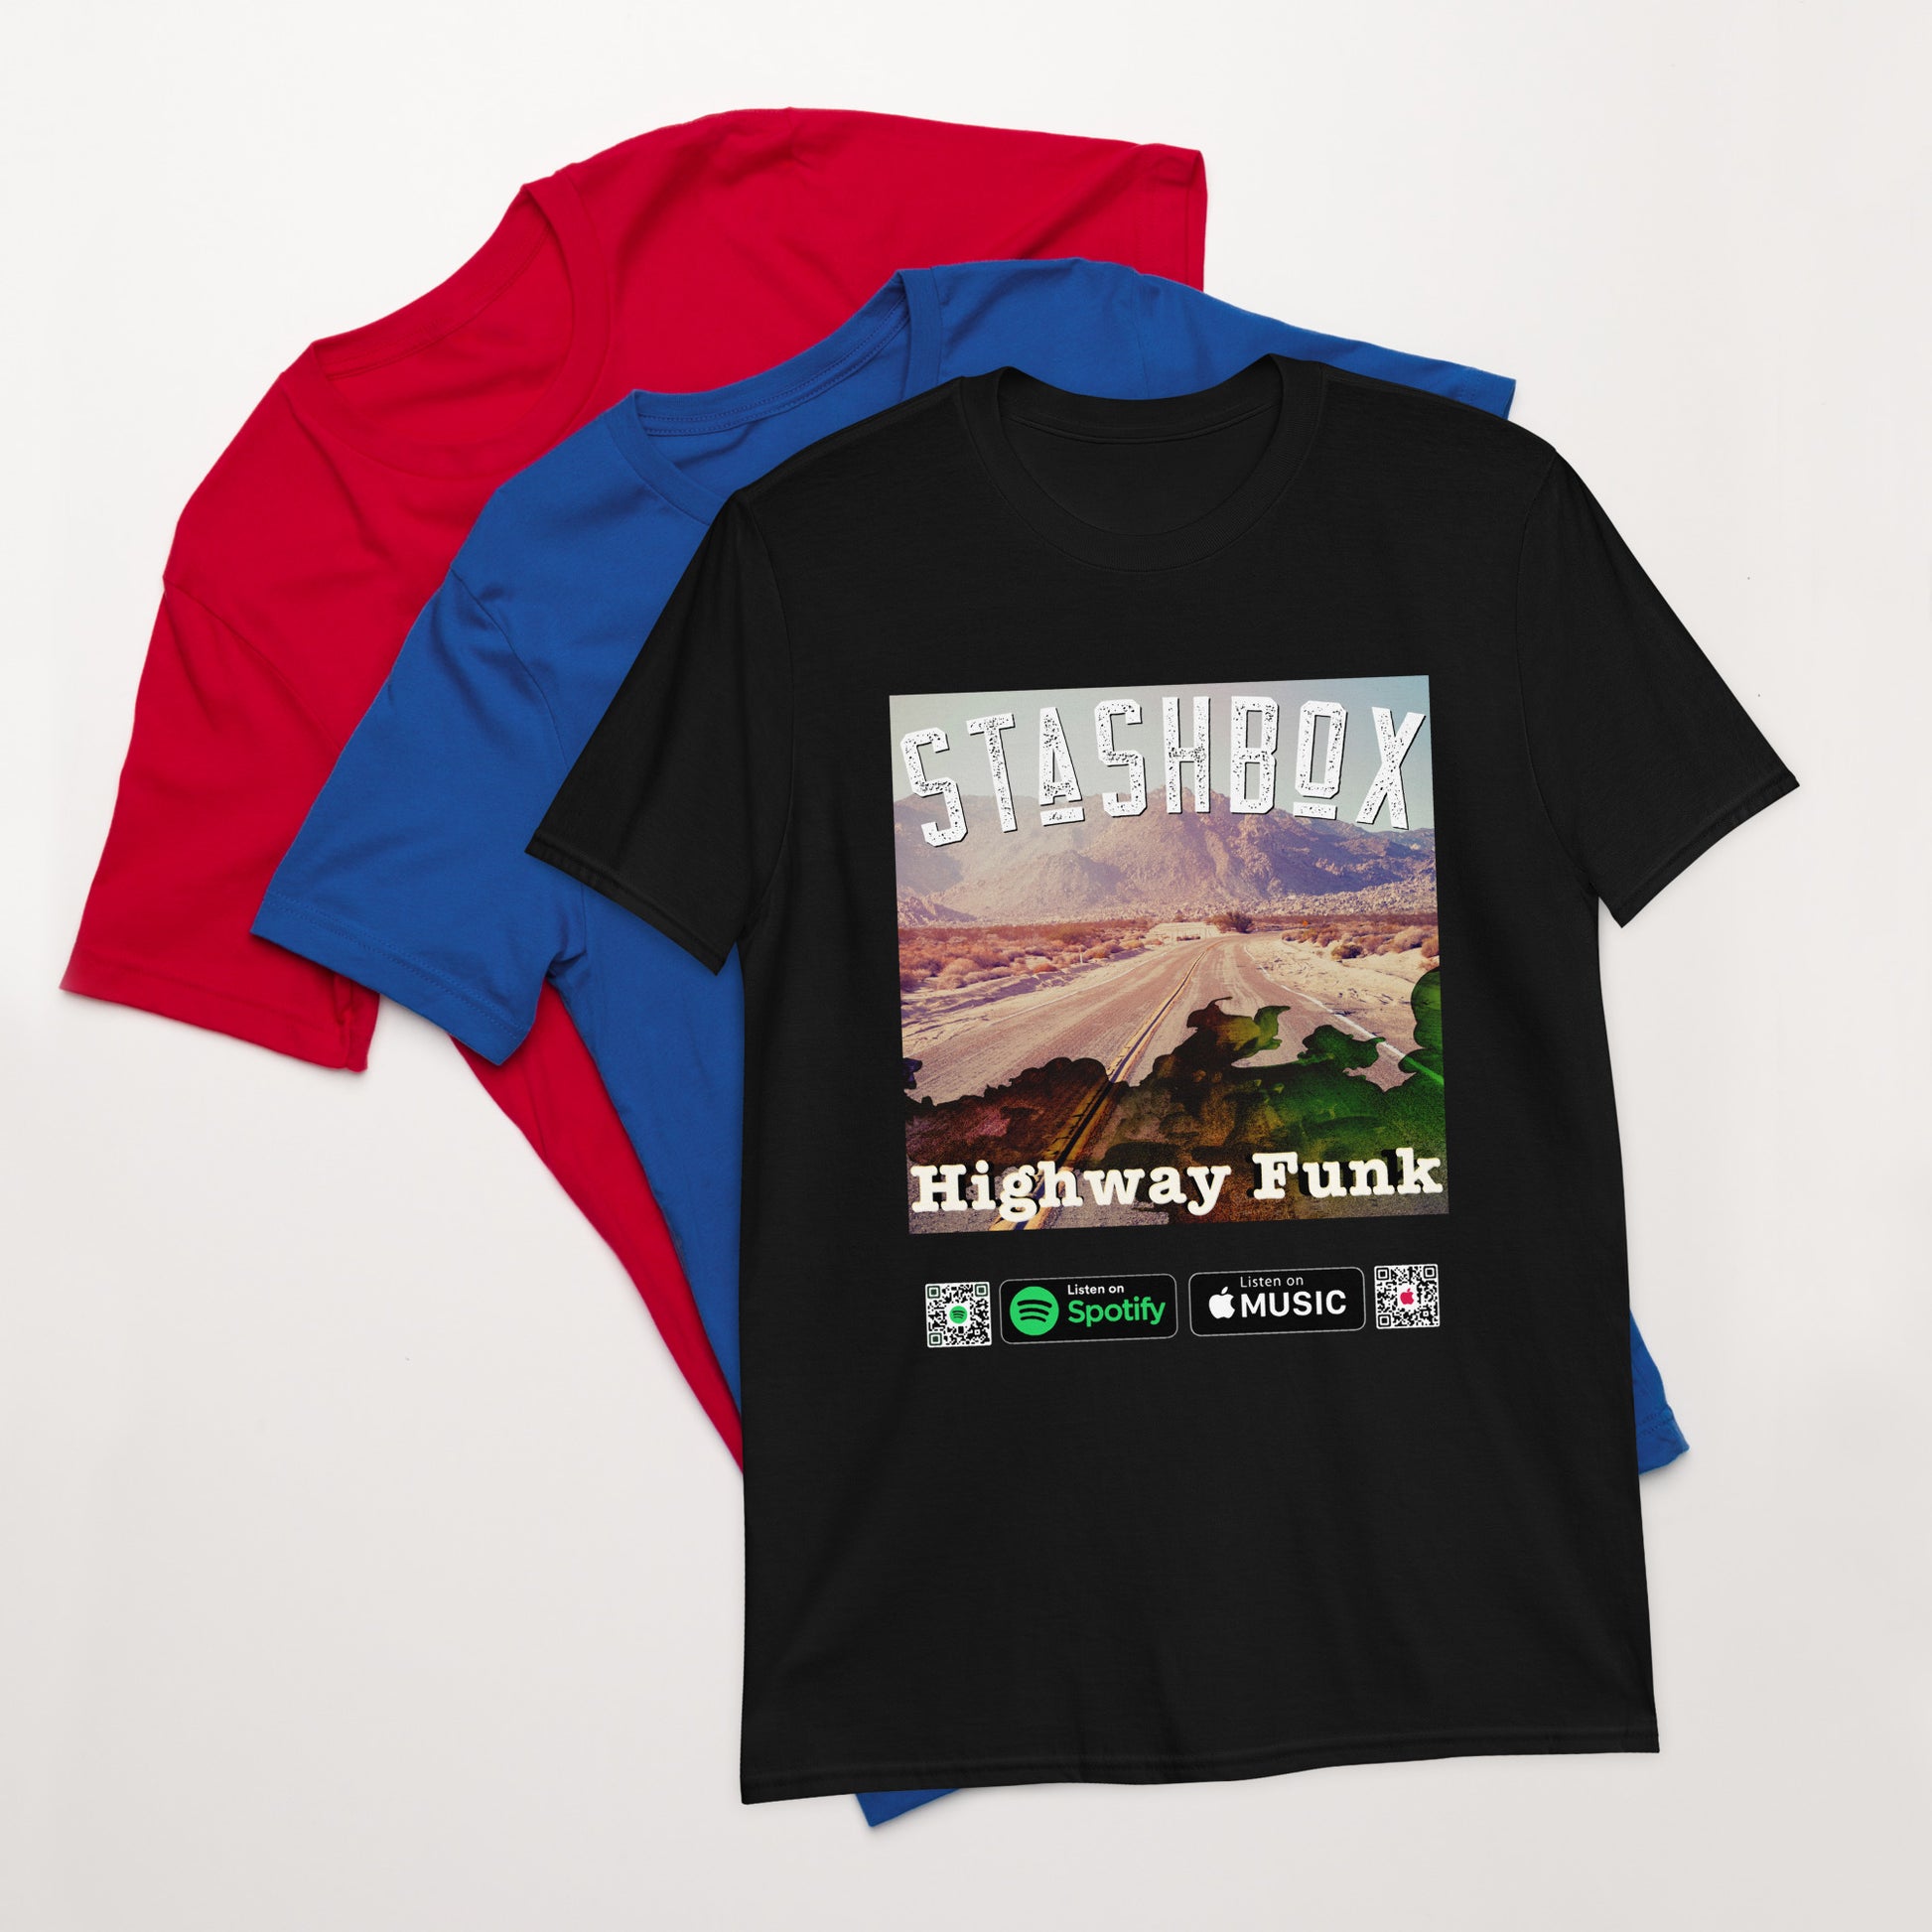 Rev up your style with our Highway Jam Short-Sleeve Unisex T-Shirt, Design #020 by Stashbox. Your attire, your masterpiece, exclusively at Stashbox.ai.